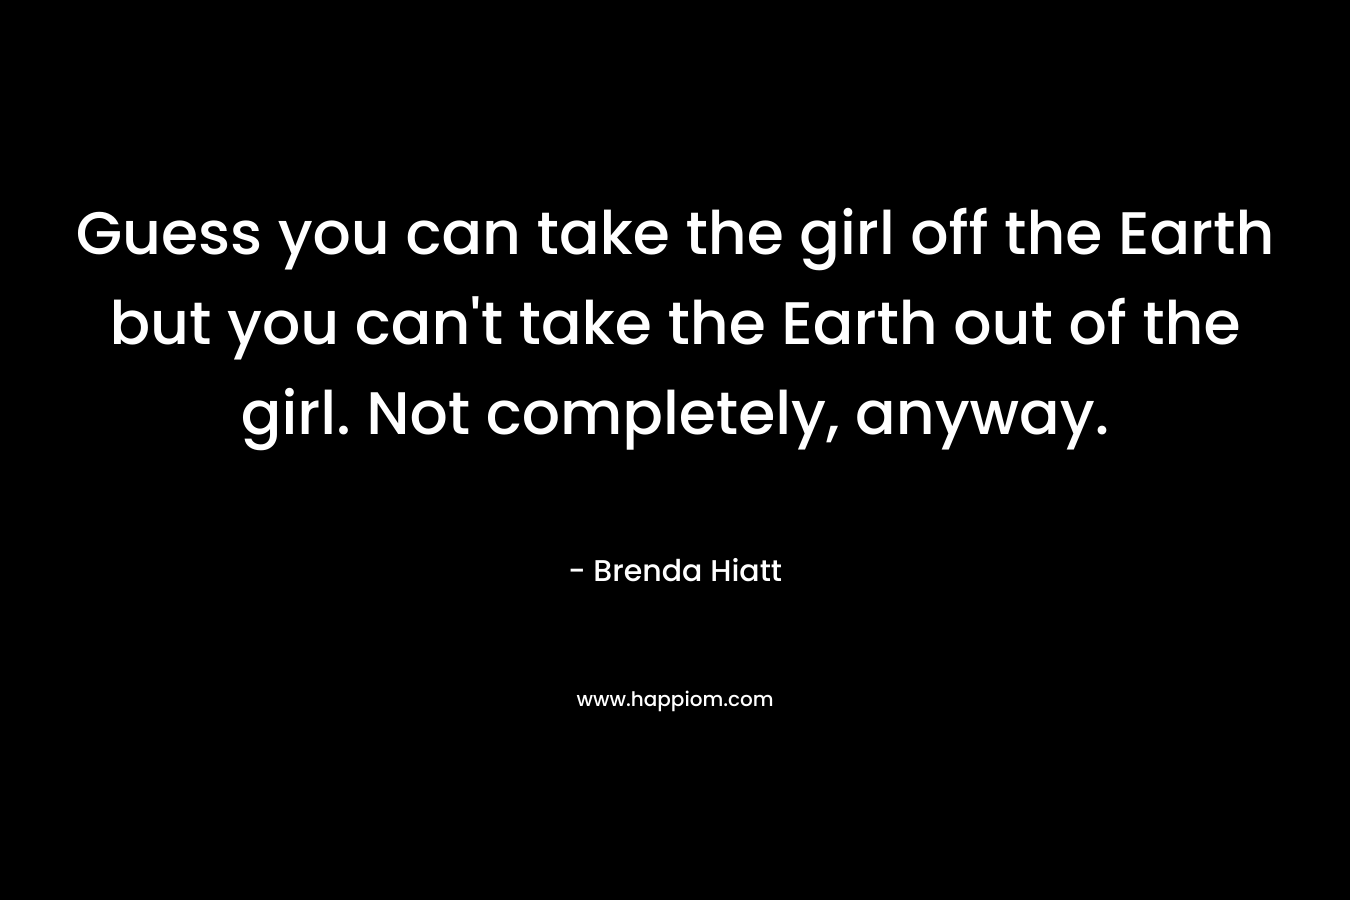 Guess you can take the girl off the Earth but you can't take the Earth out of the girl. Not completely, anyway.